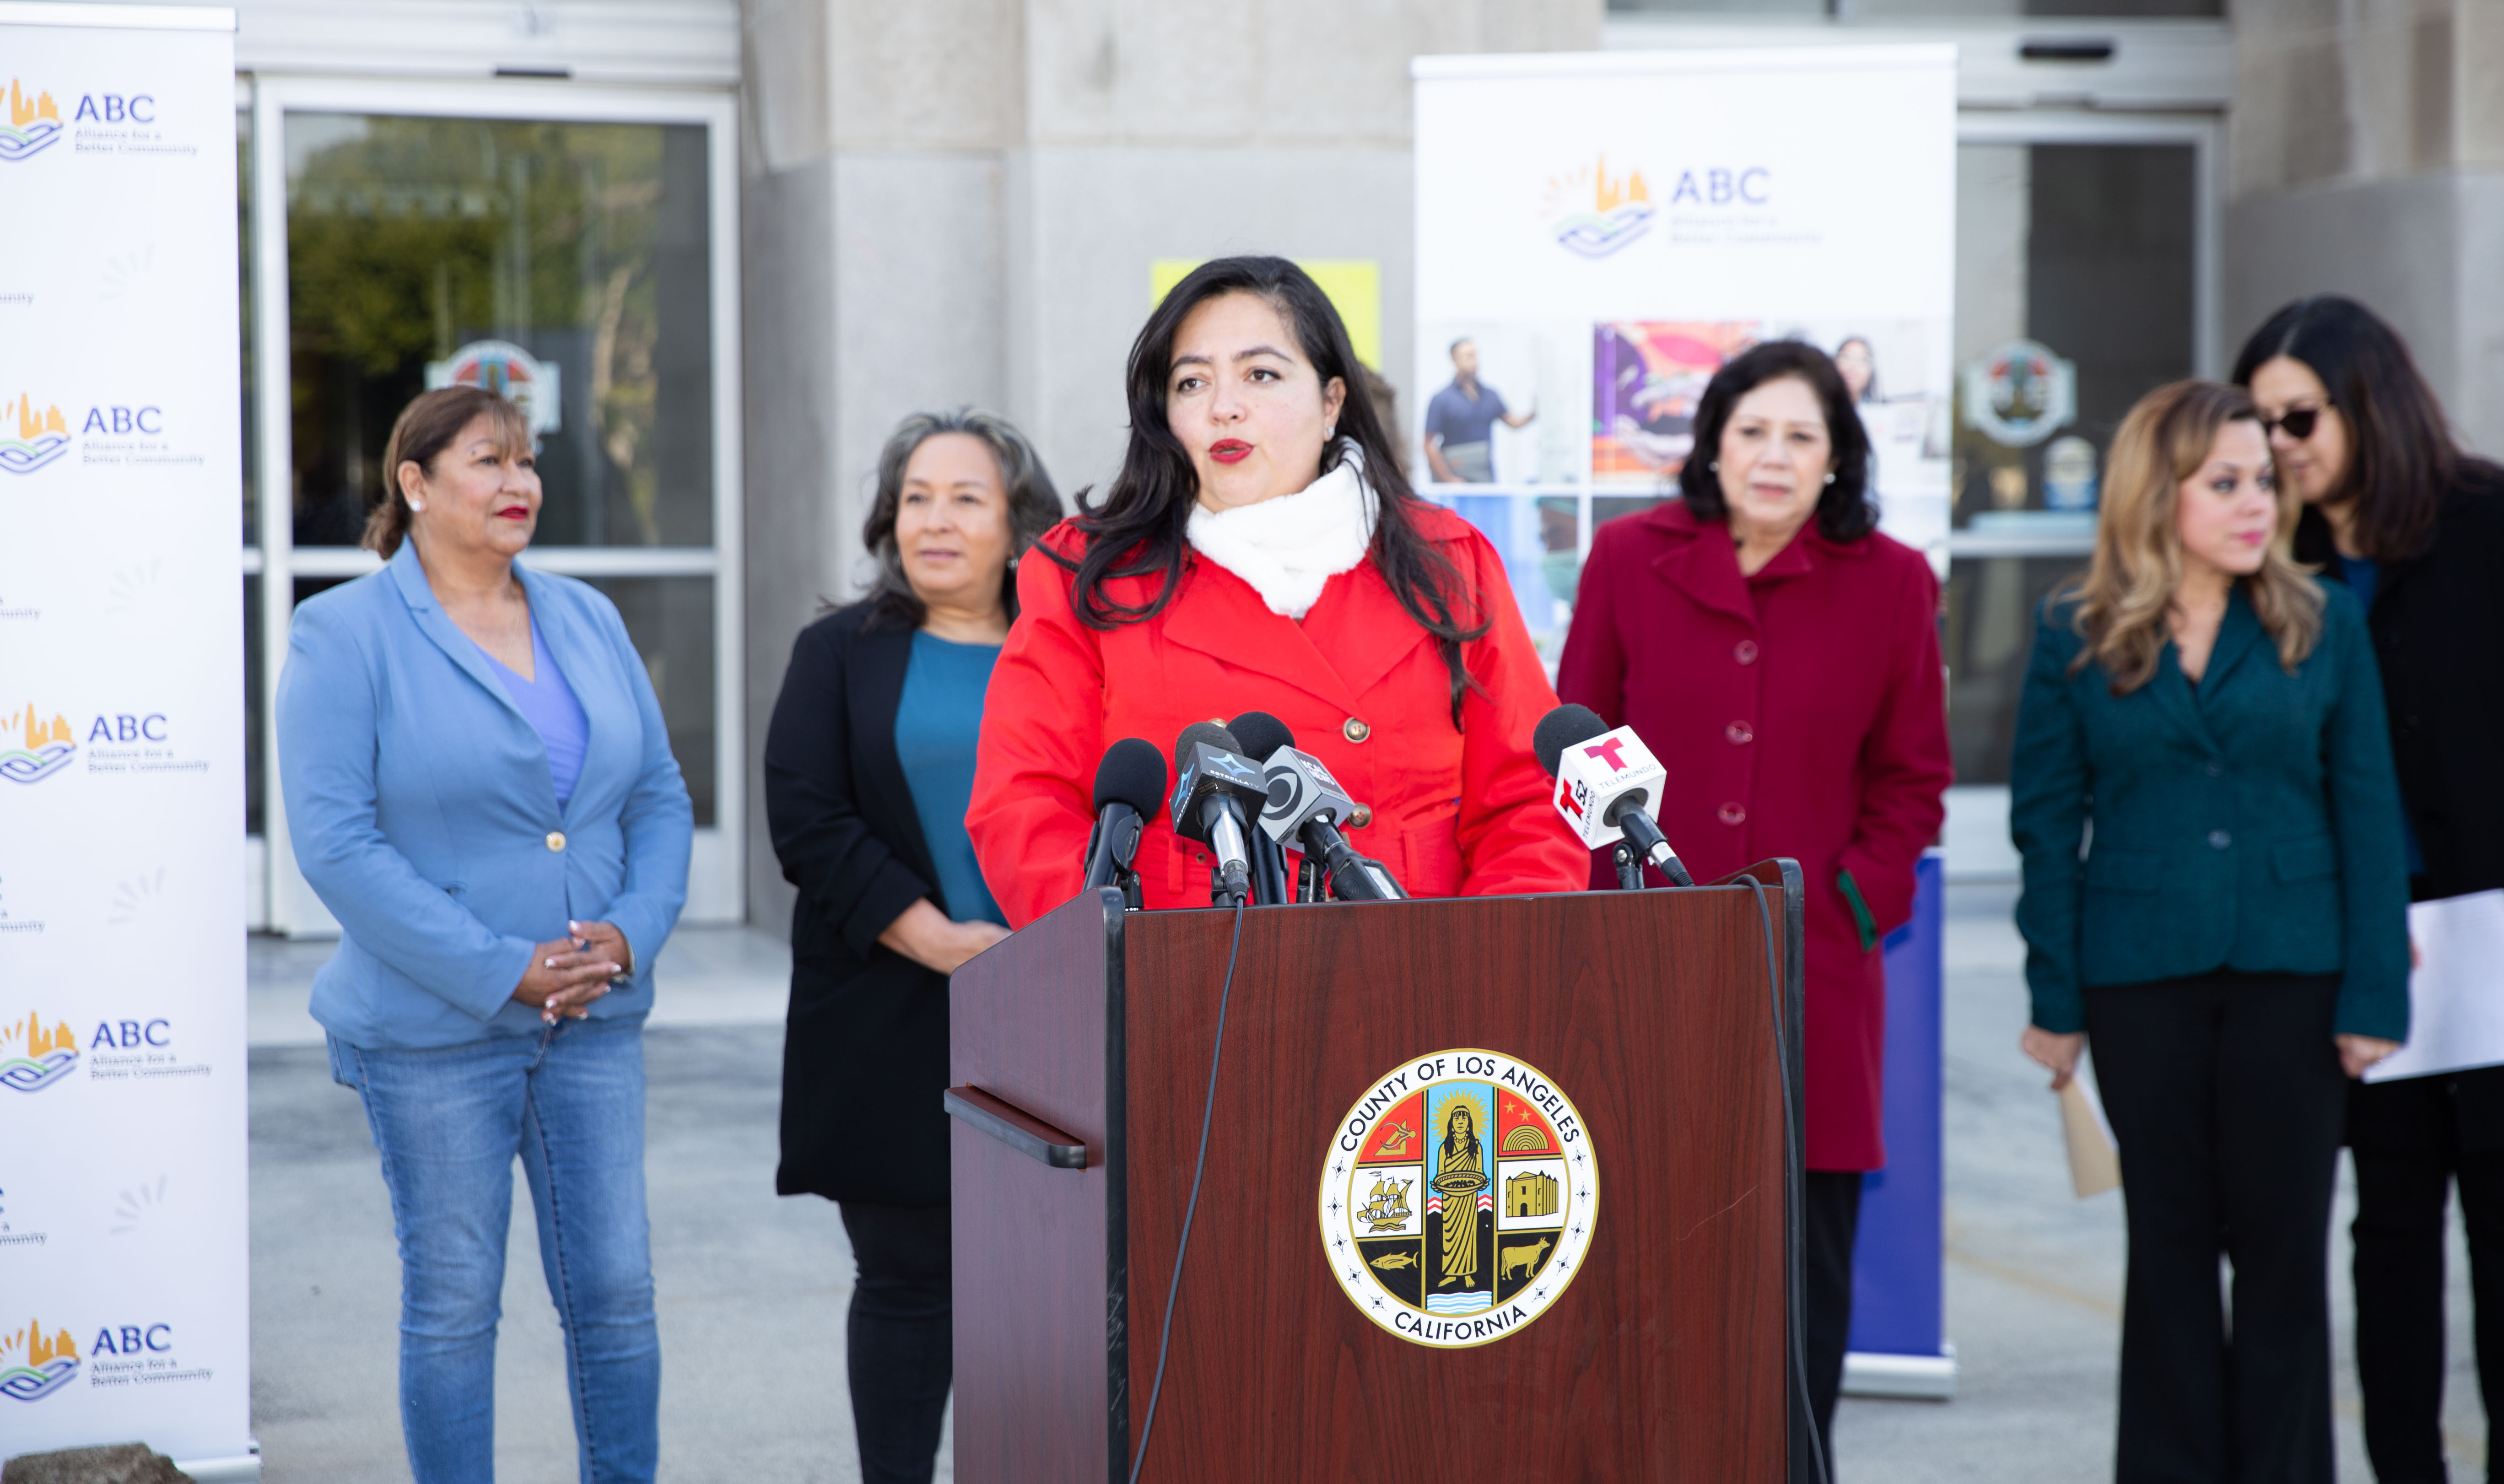 Assemblywoman Wendy Carrillo (D-Los Angeles) announced the launch of a major state initiative to find and compensate survivors of unknown or forced sterilization at LA County General Hospital